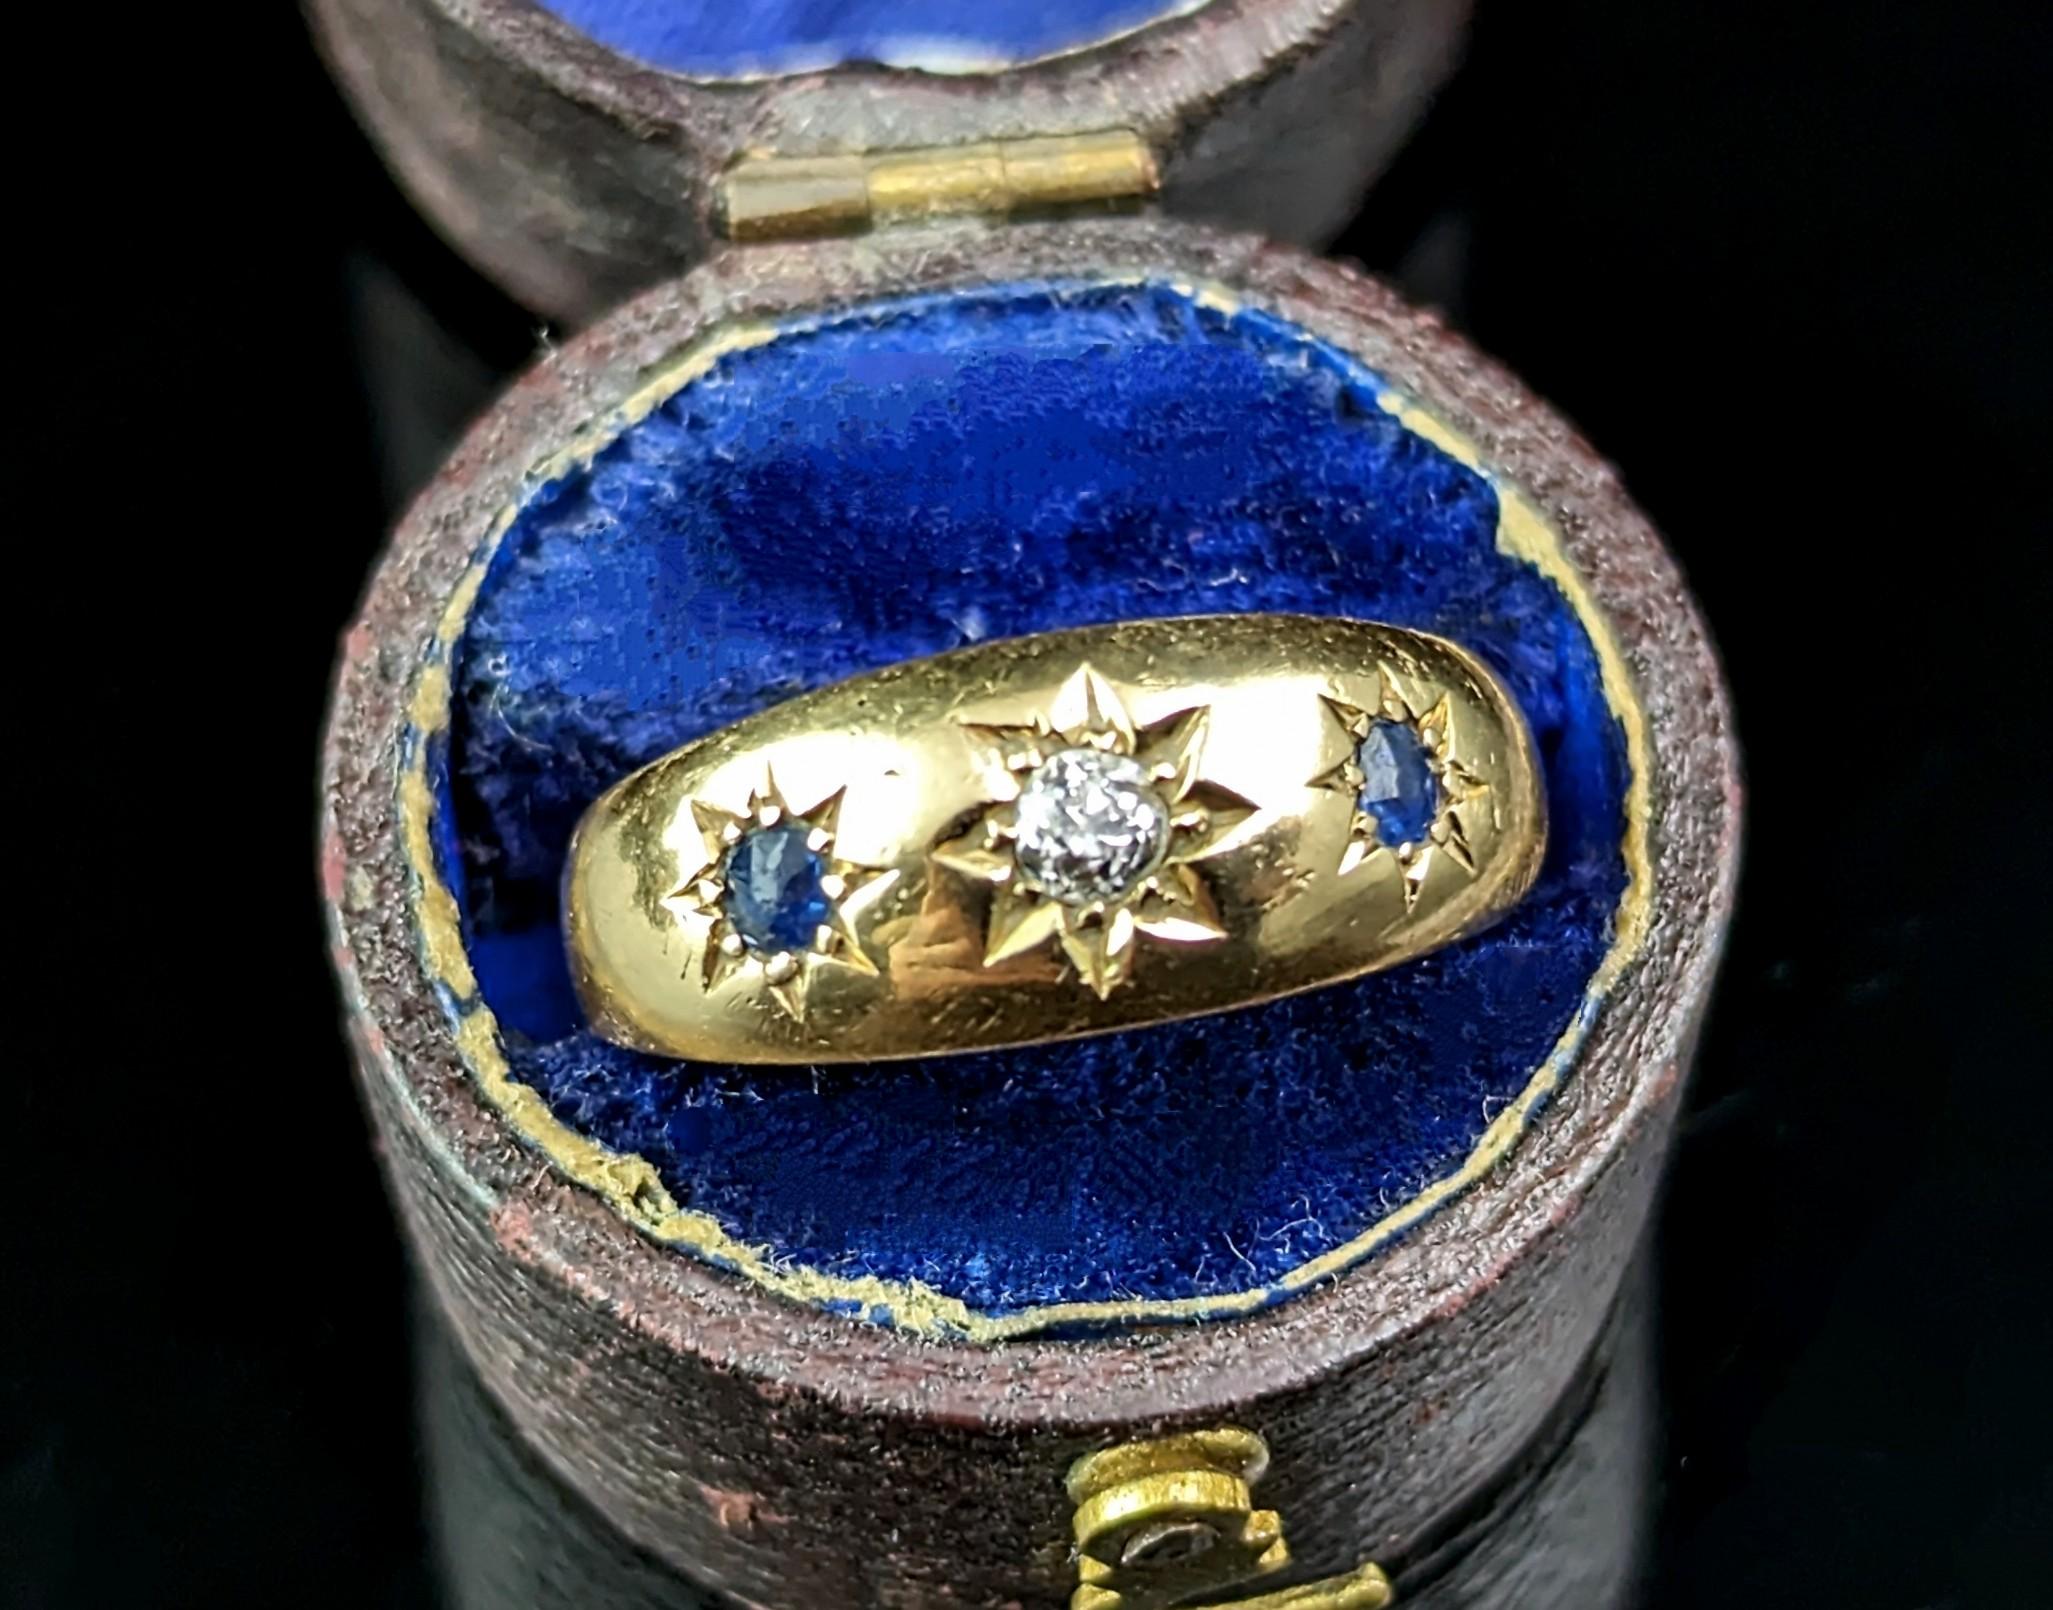 You can't help but fall in love with this beautiful antique Star set diamond and Sapphire ring.

Set in rich buttery 18ct gold, the iconic star shaped setting giving a lovely celestial touch.

It feature a single old cut diamond to the centre